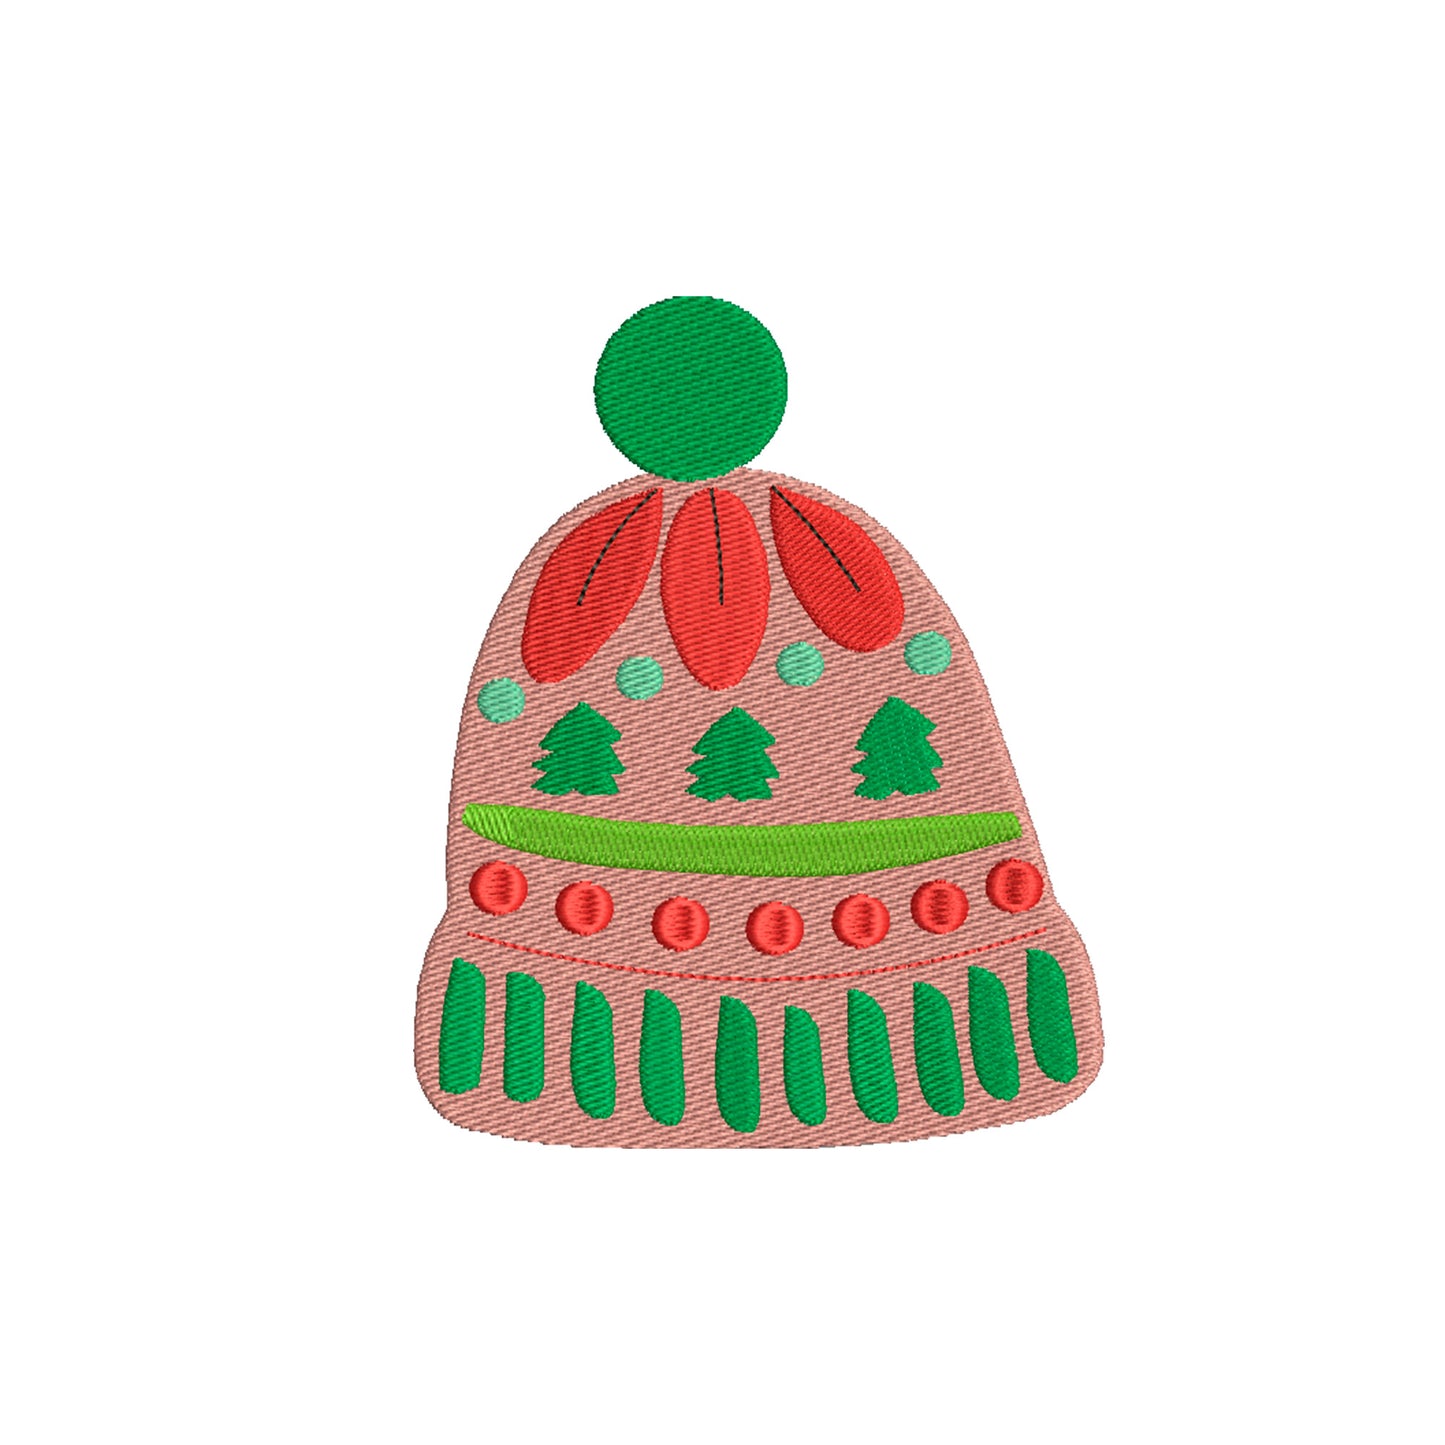 Christmas hat embroidery designs - 910106